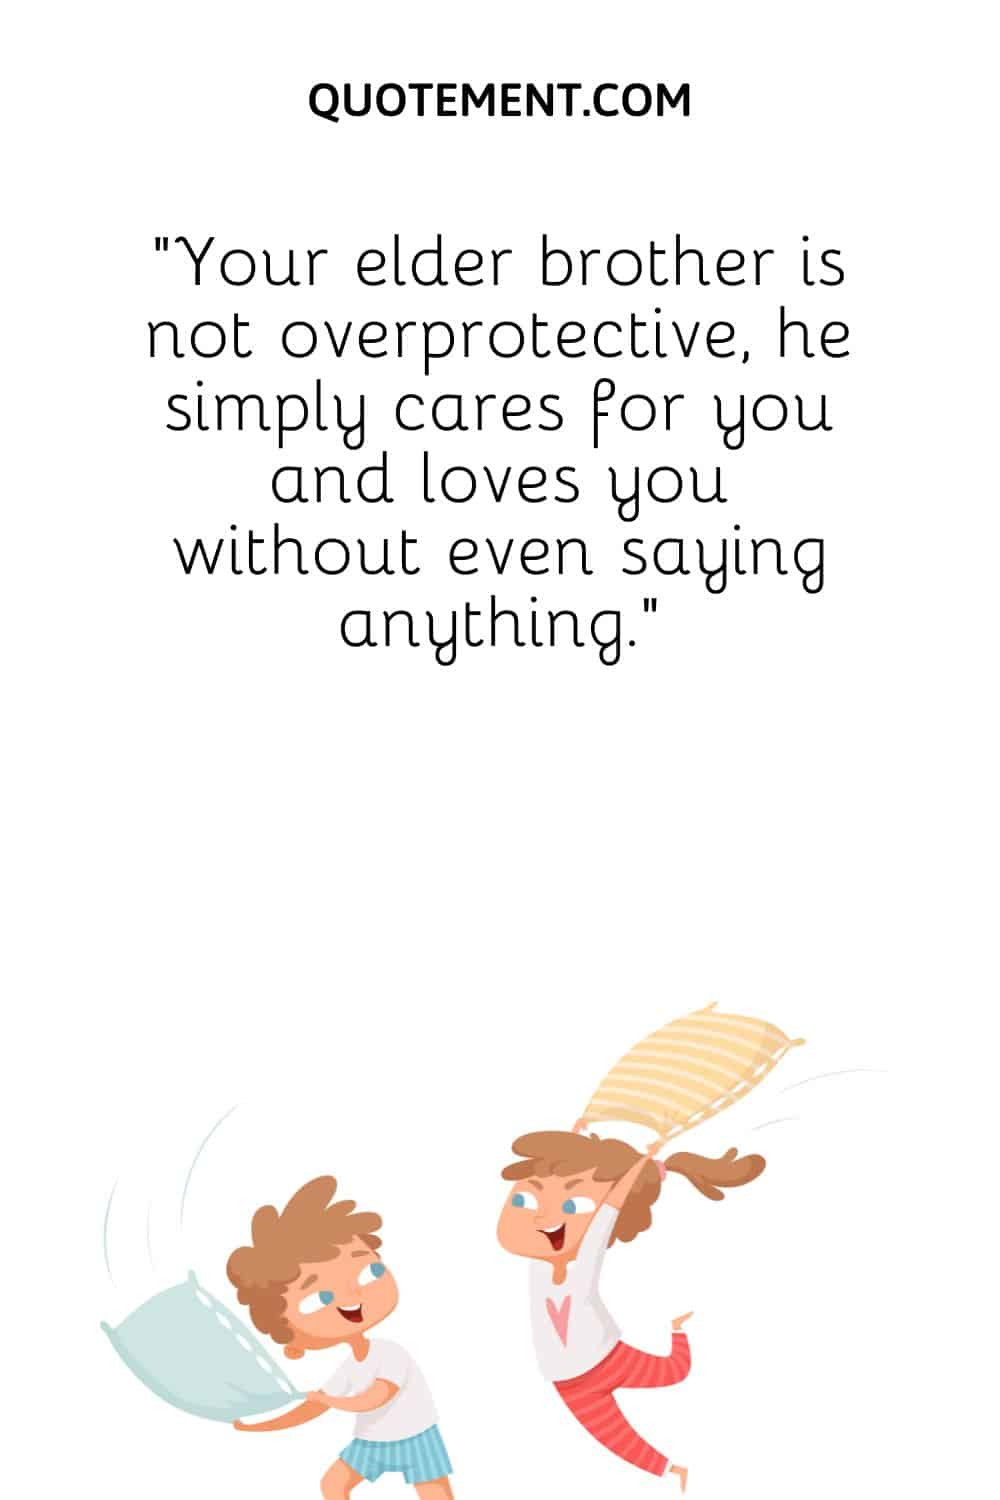 Your elder brother is not overprotective, he simply cares for you and loves you without even saying anything